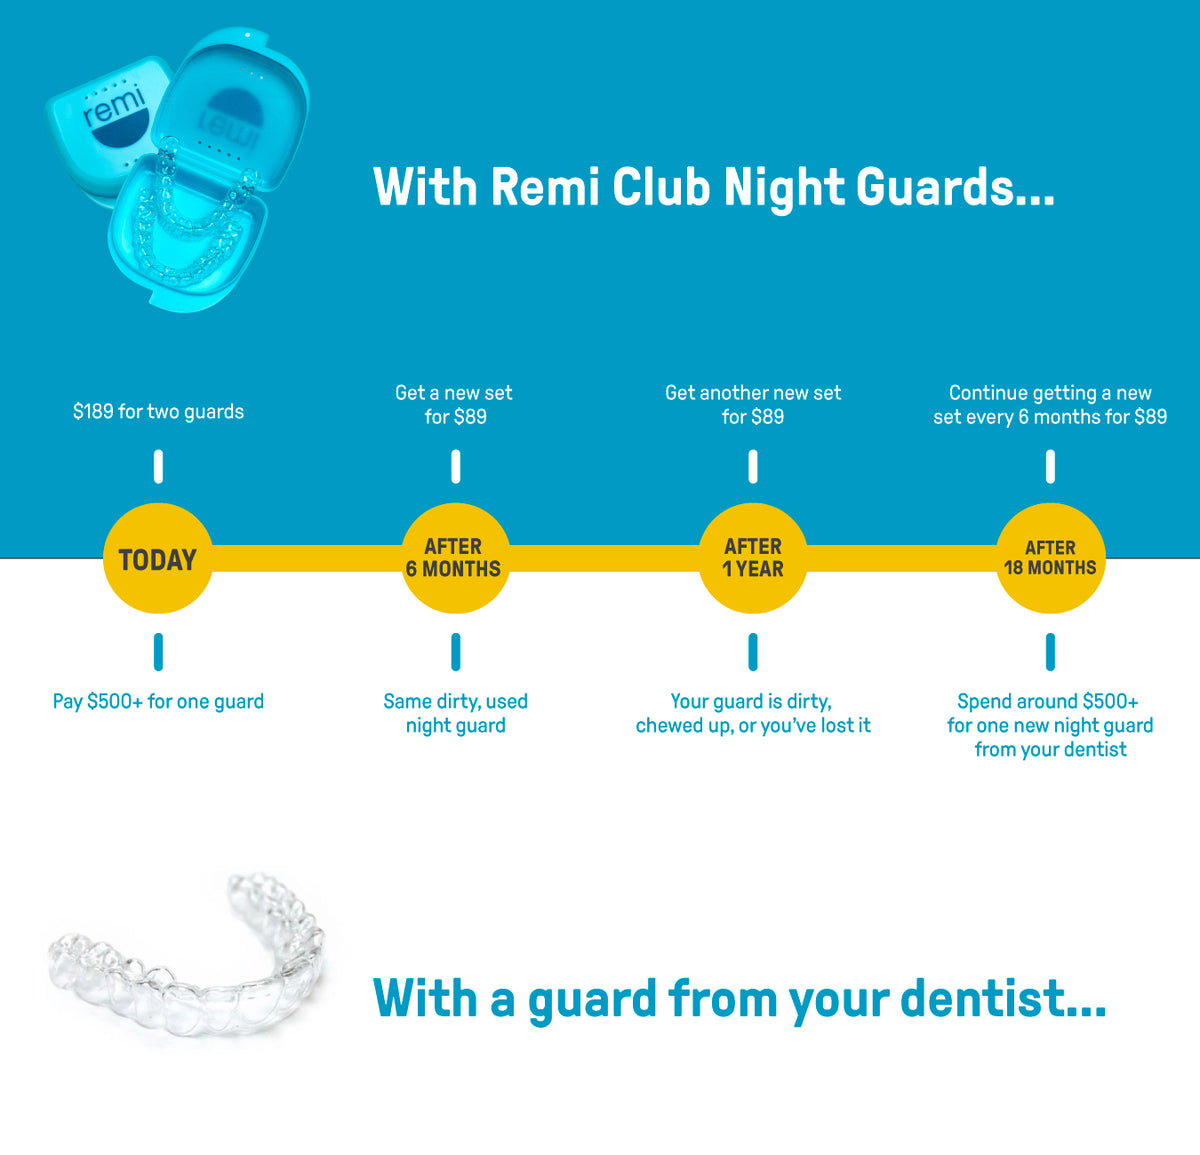 Advertisement for Custom Night Guards subscription service, featuring dental-grade quality night guards with detailed cost and replacement schedule for those who suffer from teeth grinding.